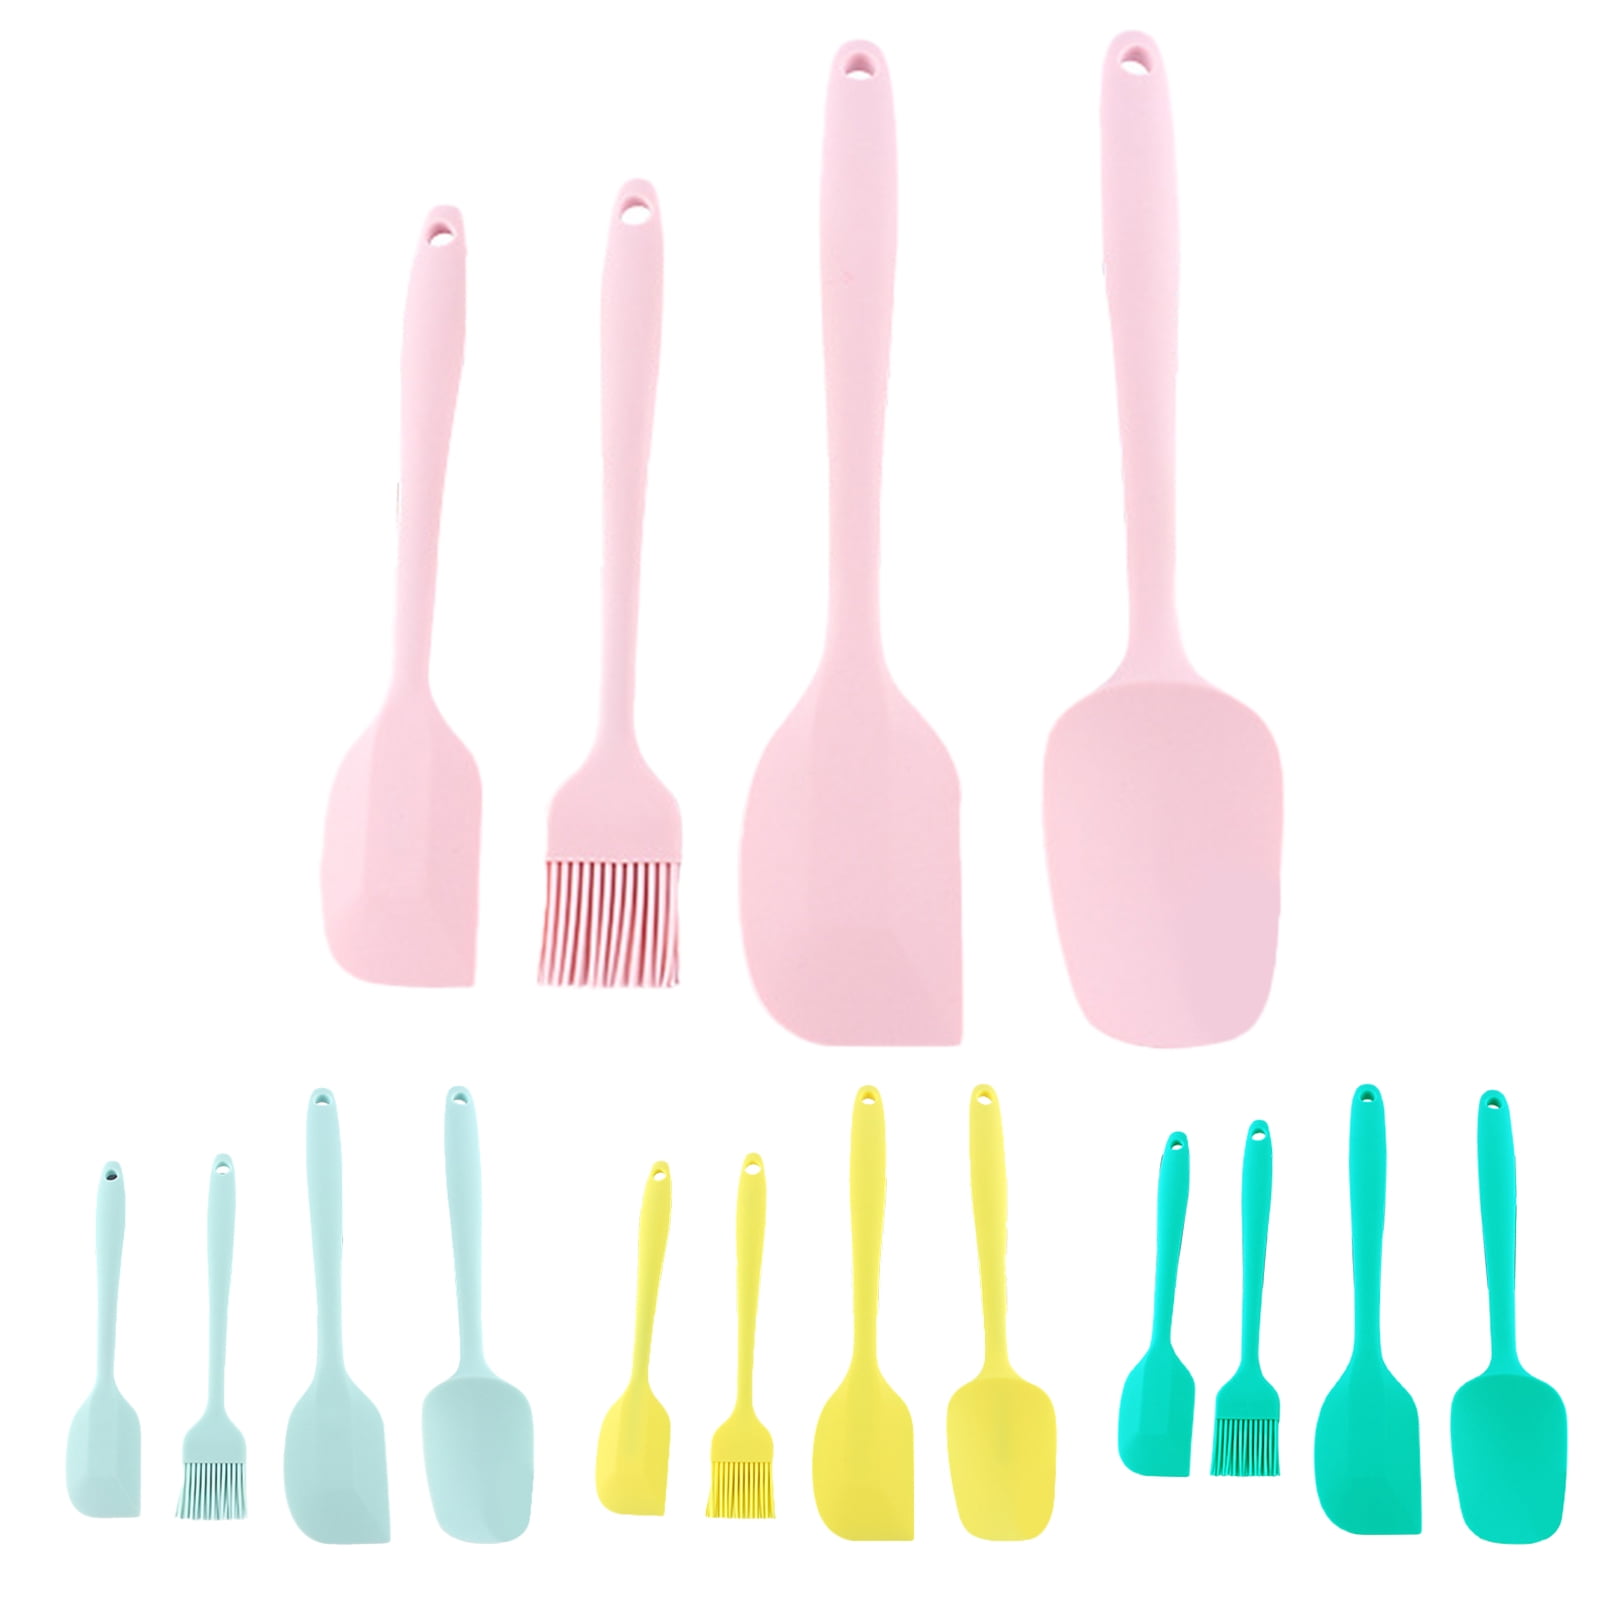 Shenmeida 4PCS Silicone Spatulas Bulk for Kitchen, Baking, Cake Icing,  Resin Craft, Mini Silicon Scraper Tool, Jar Spatula with Long Handle Heat  Resistant 